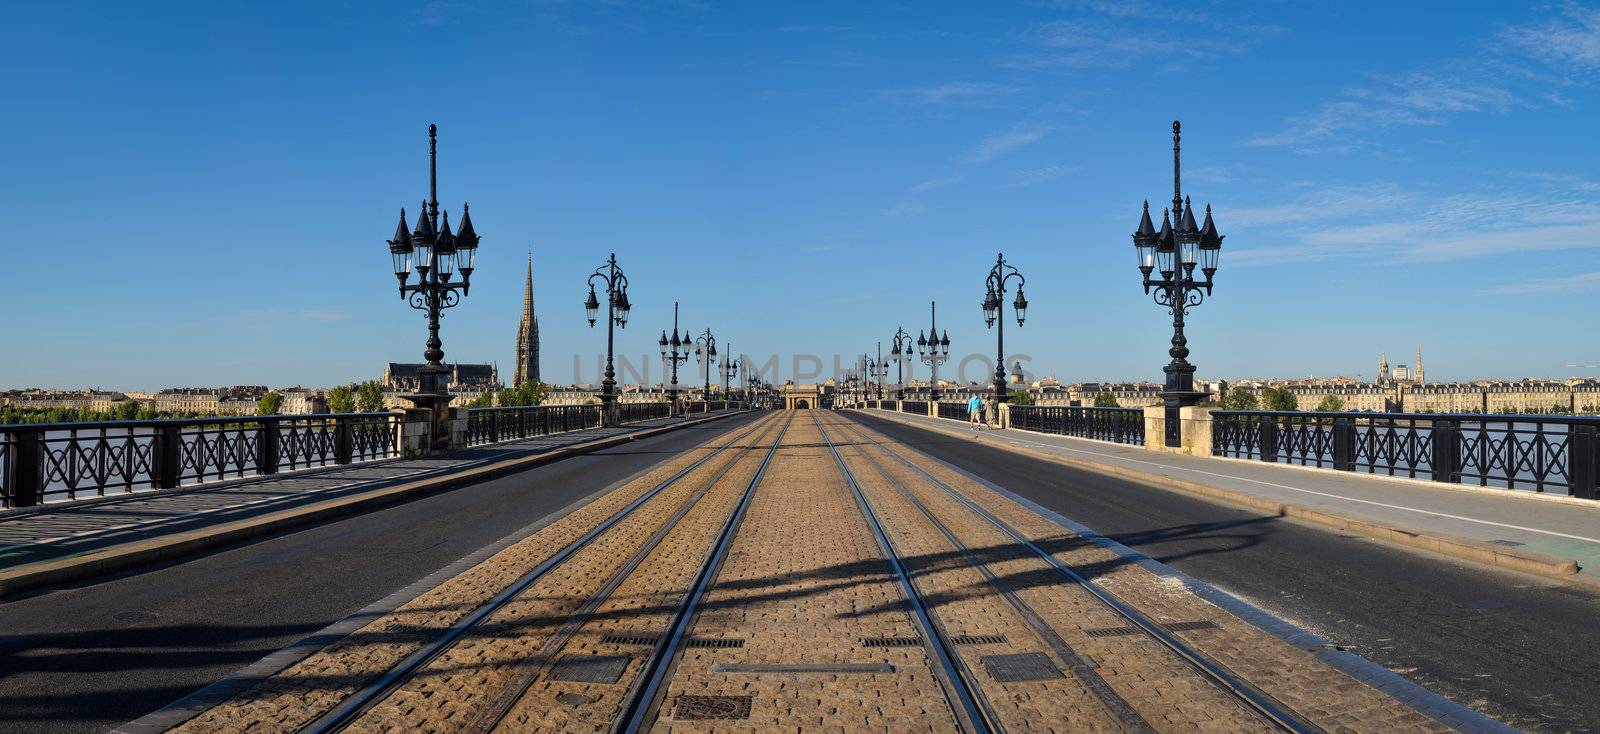 Bordeaux panorama of the bridge by martinm303